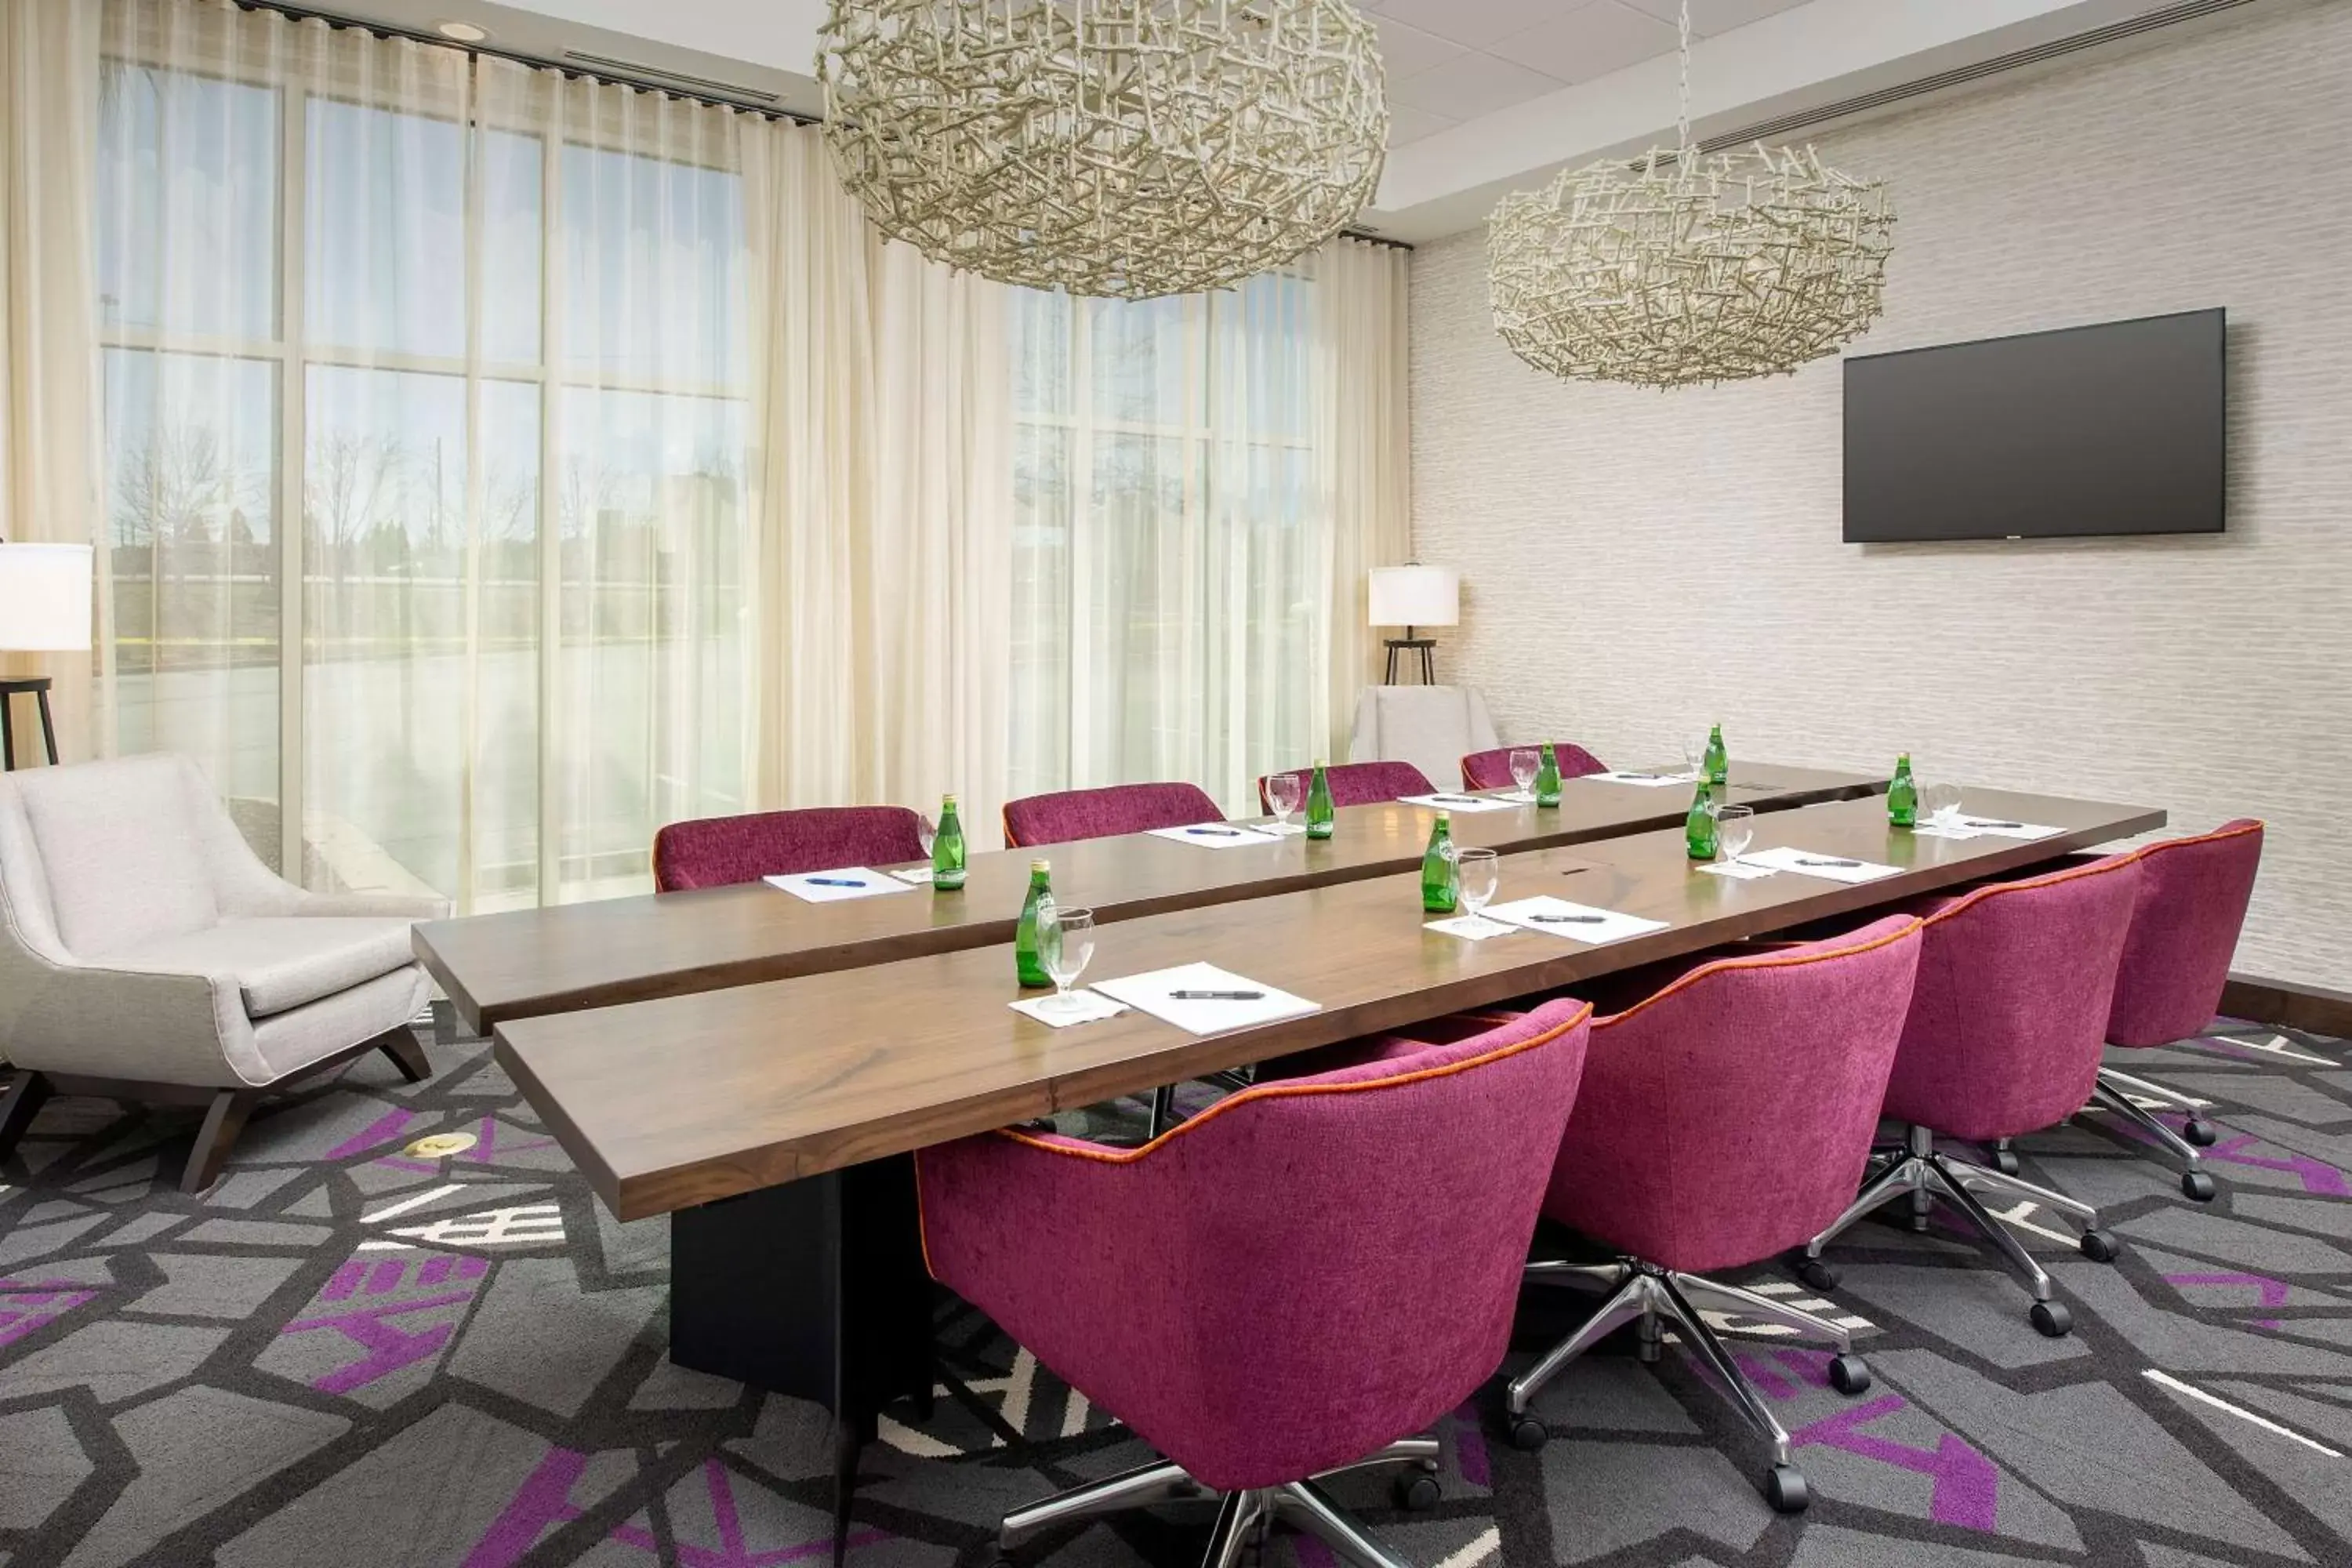 Meeting/conference room in Hilton Garden Inn Columbia Airport, SC